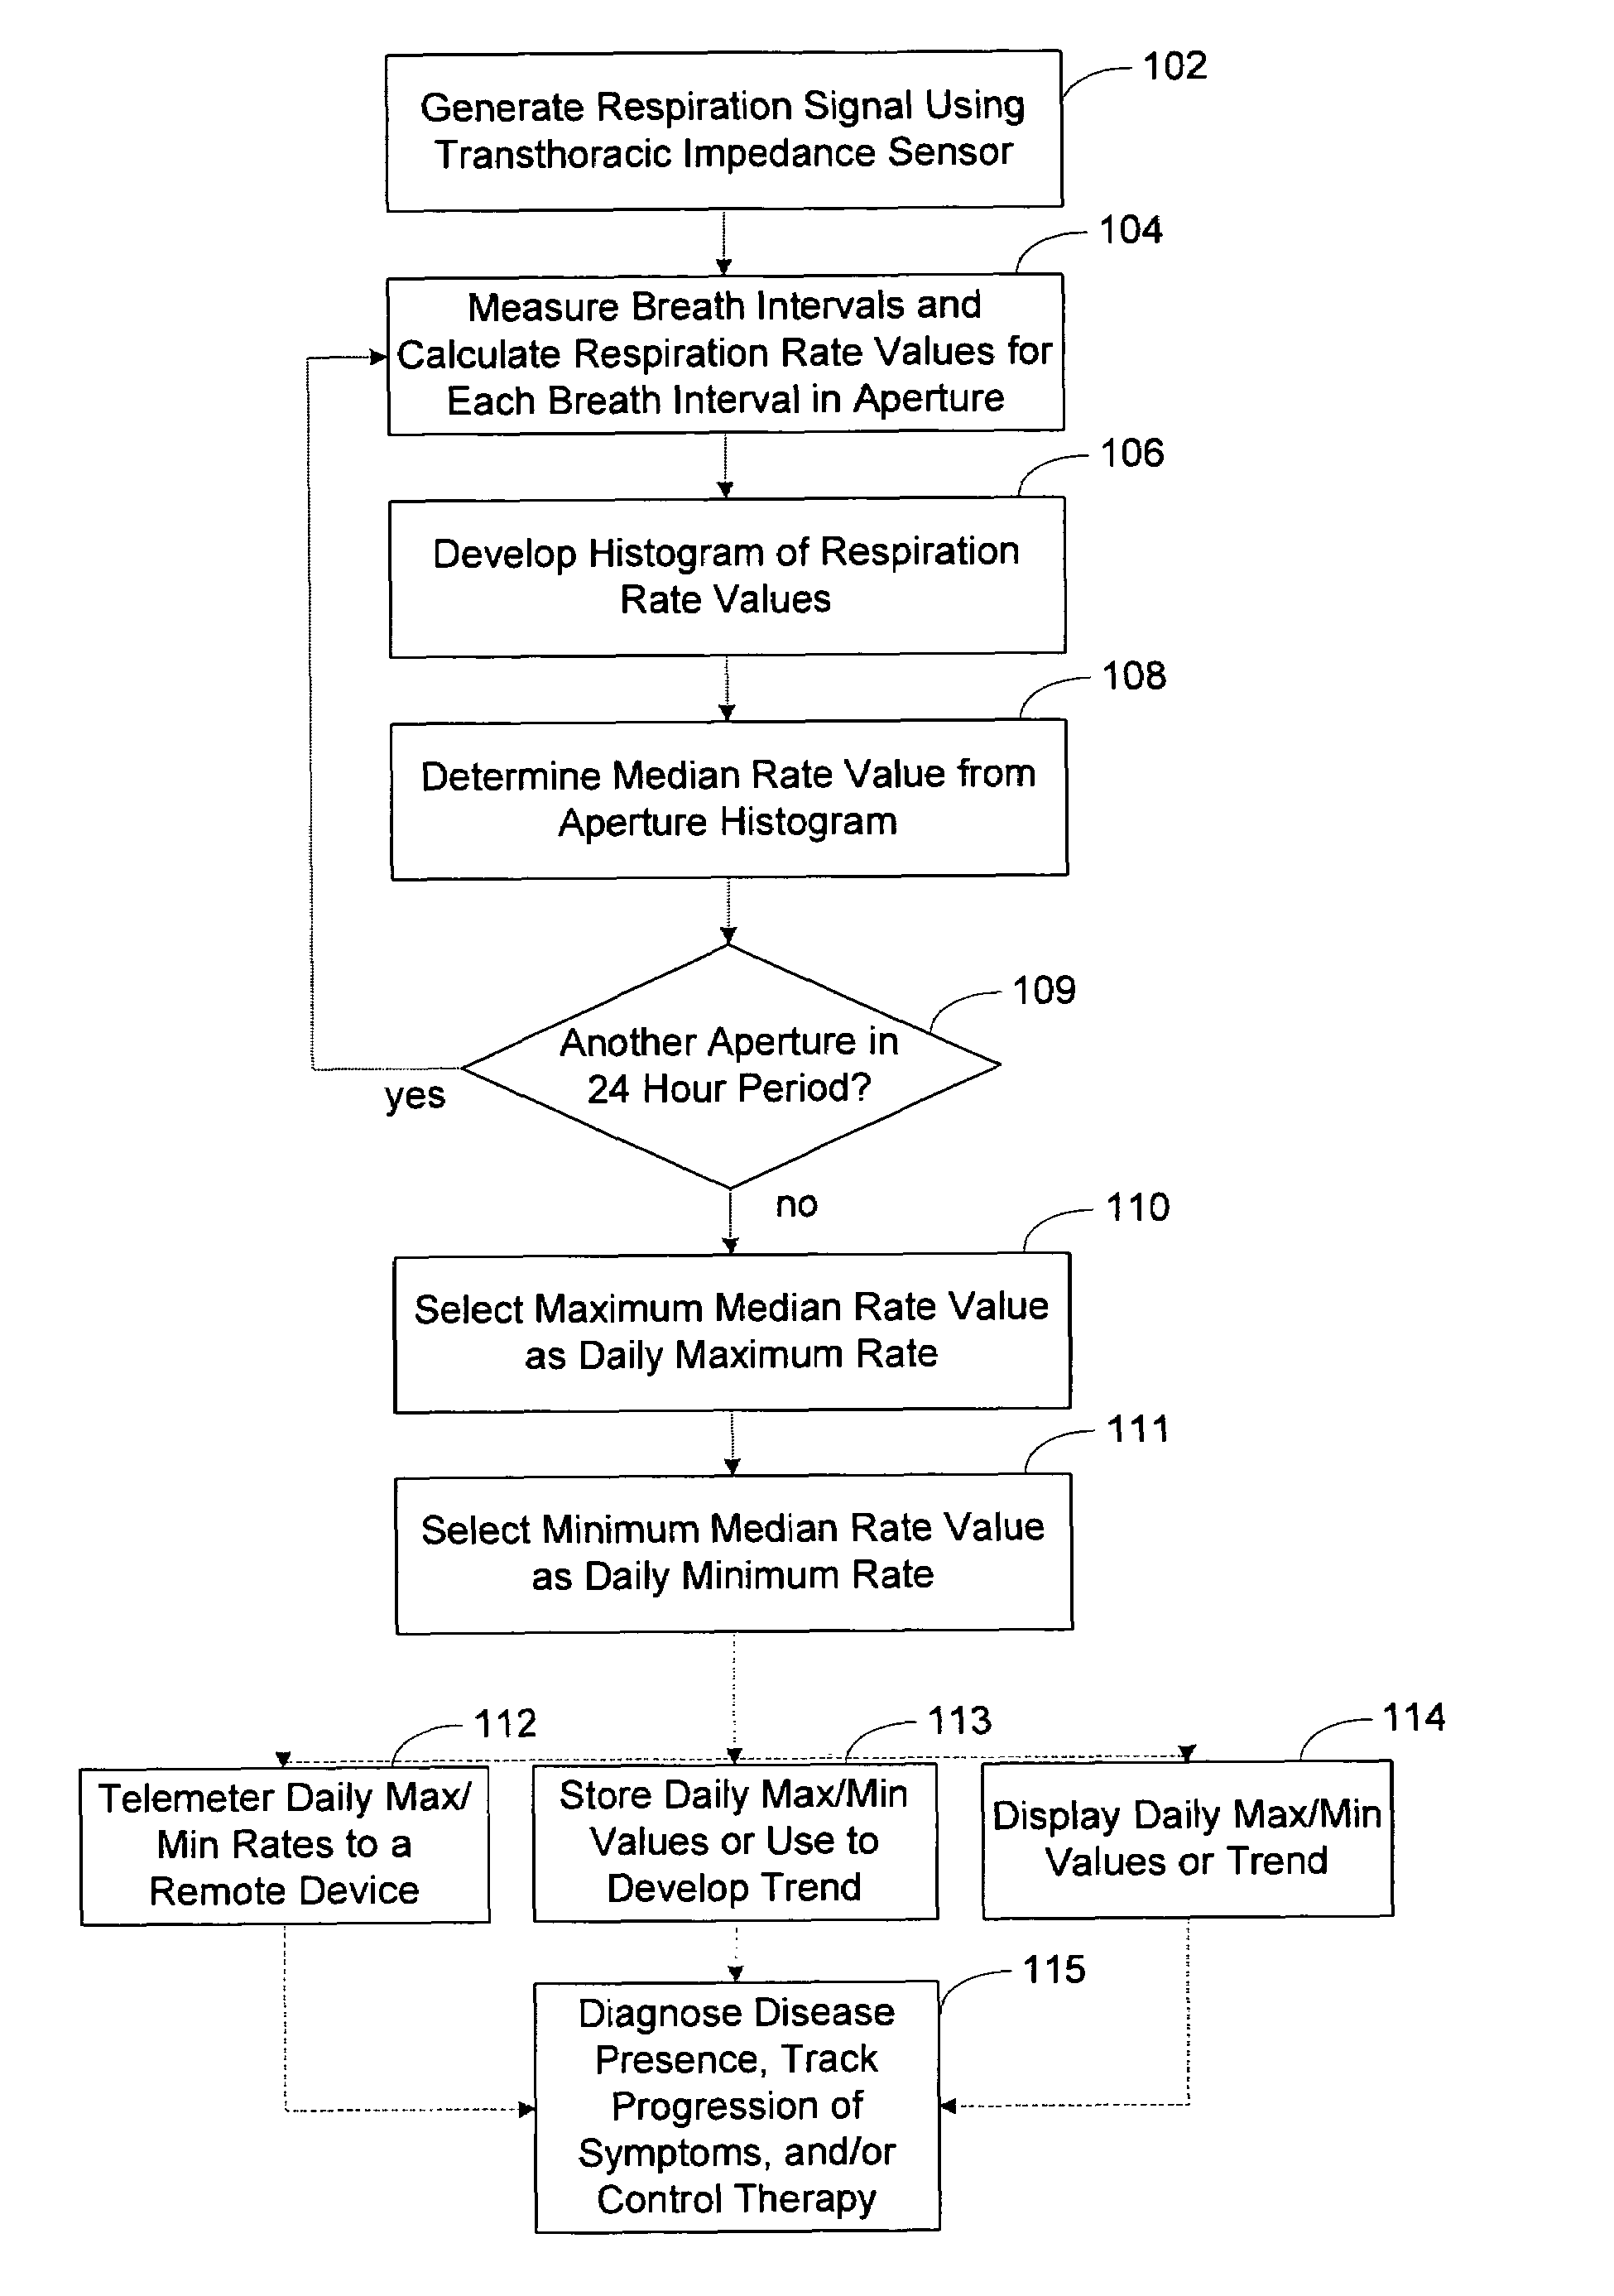 Systems and methods for determining respiration metrics